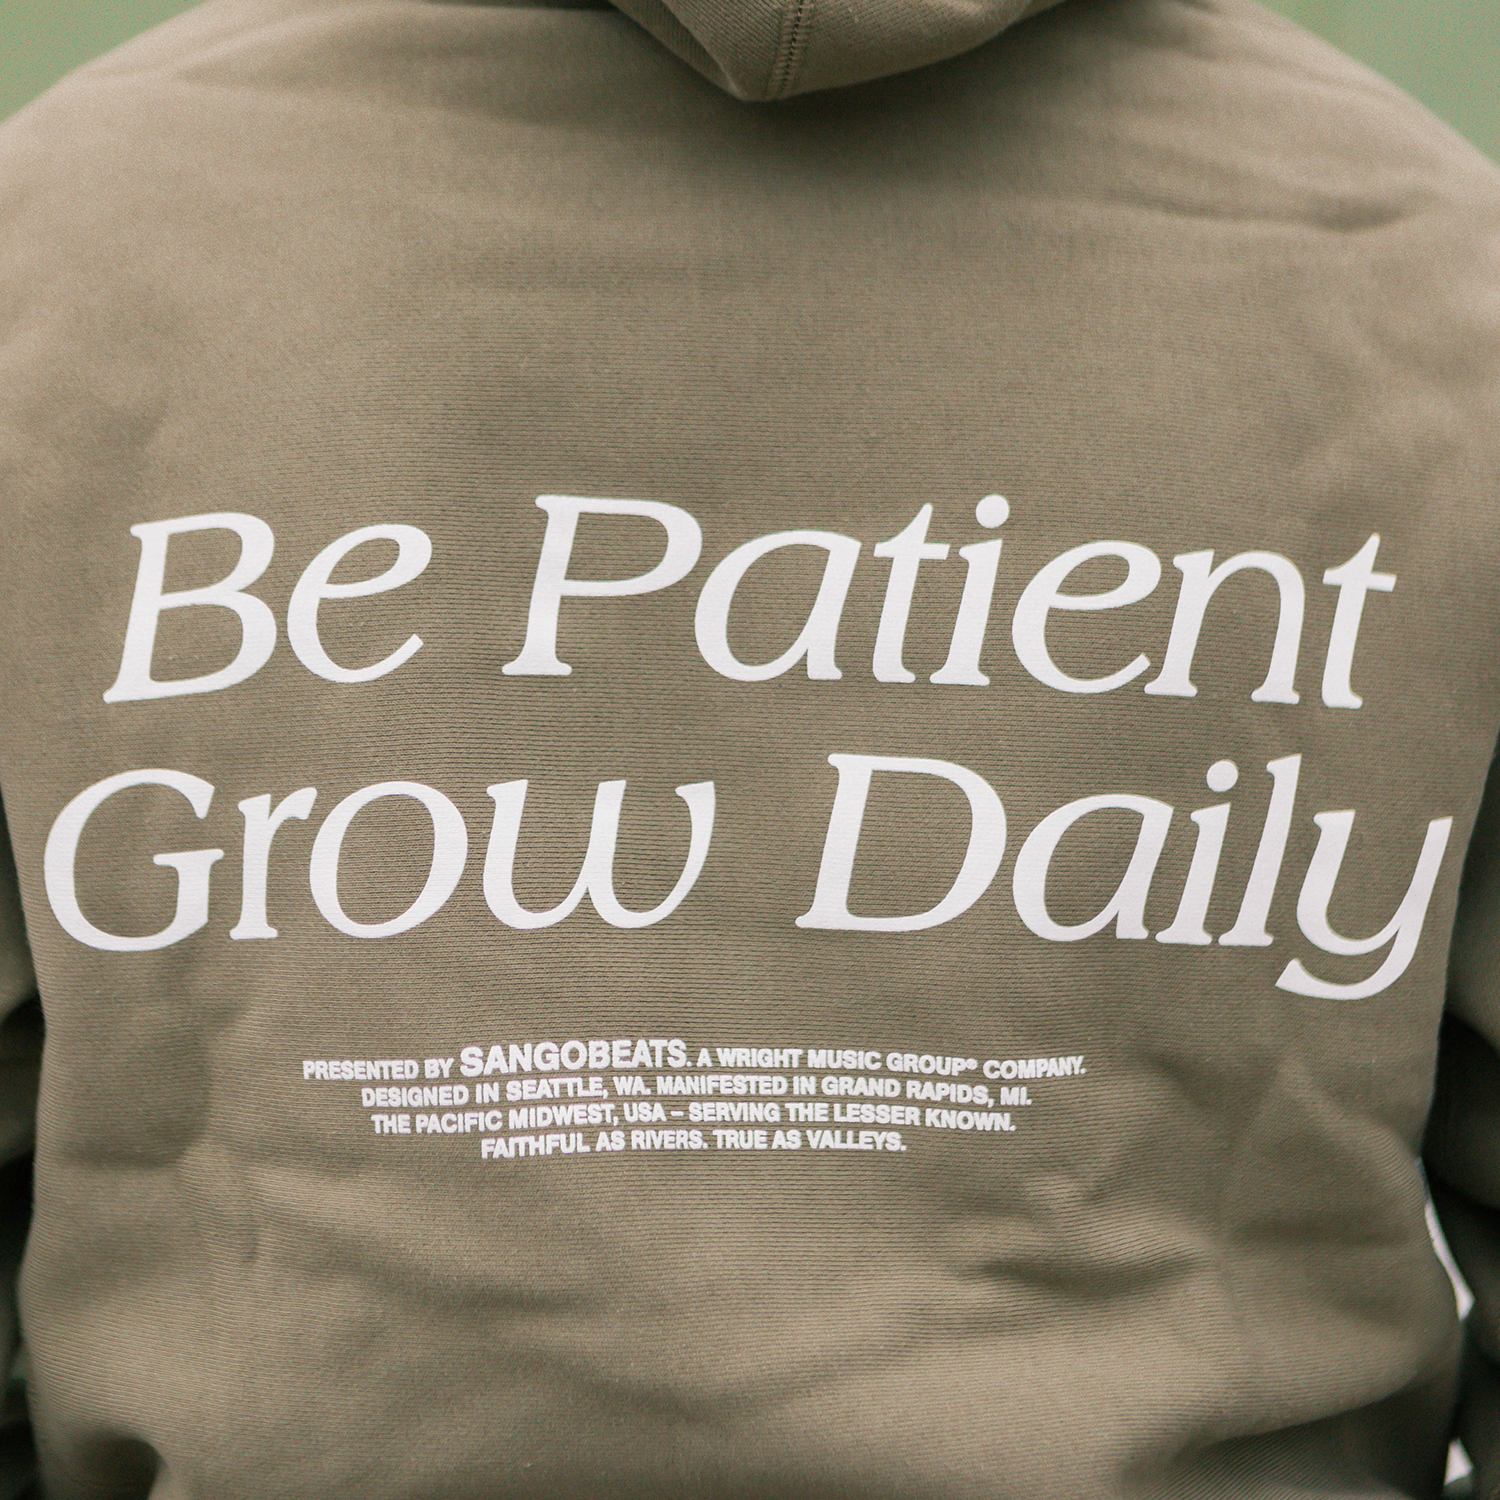 Be Patient, Grow Daily Olive Hoodie